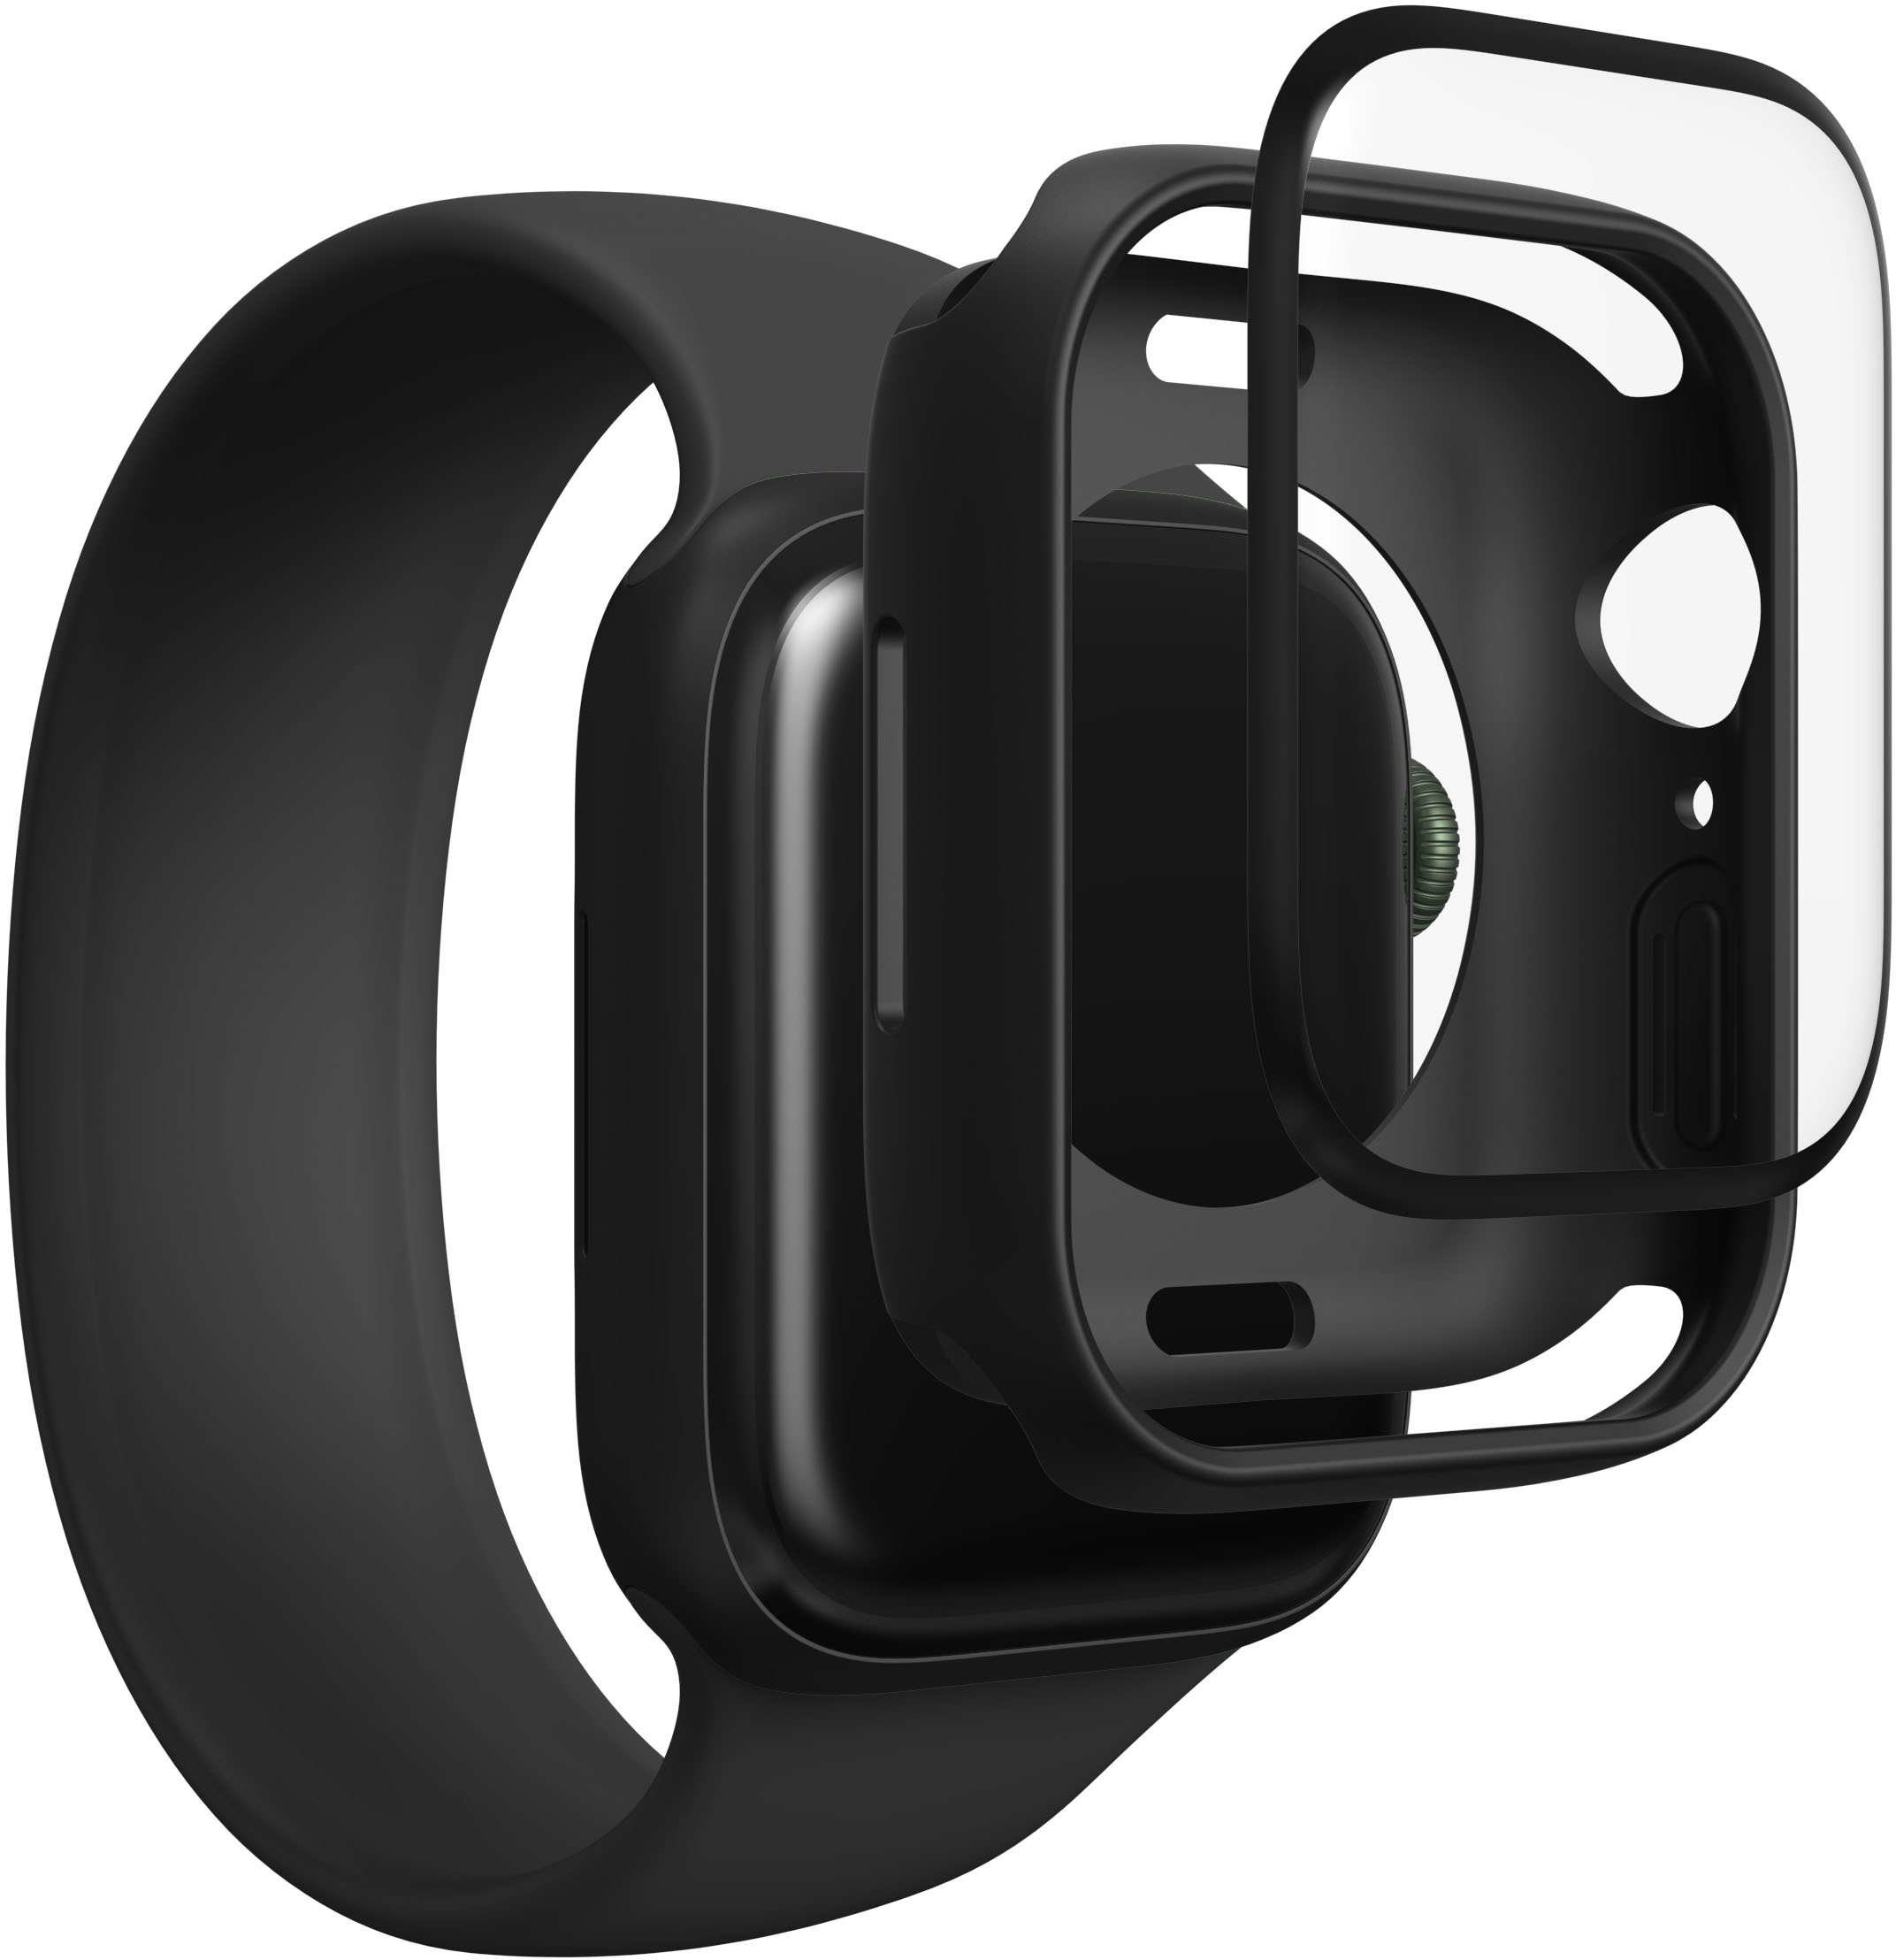 ZAGG - InvisibleShield GlassFusion+ 360 Flexible Hybrid Screen Protector + Bumper for Apple Watch Series 7 41mm - Black